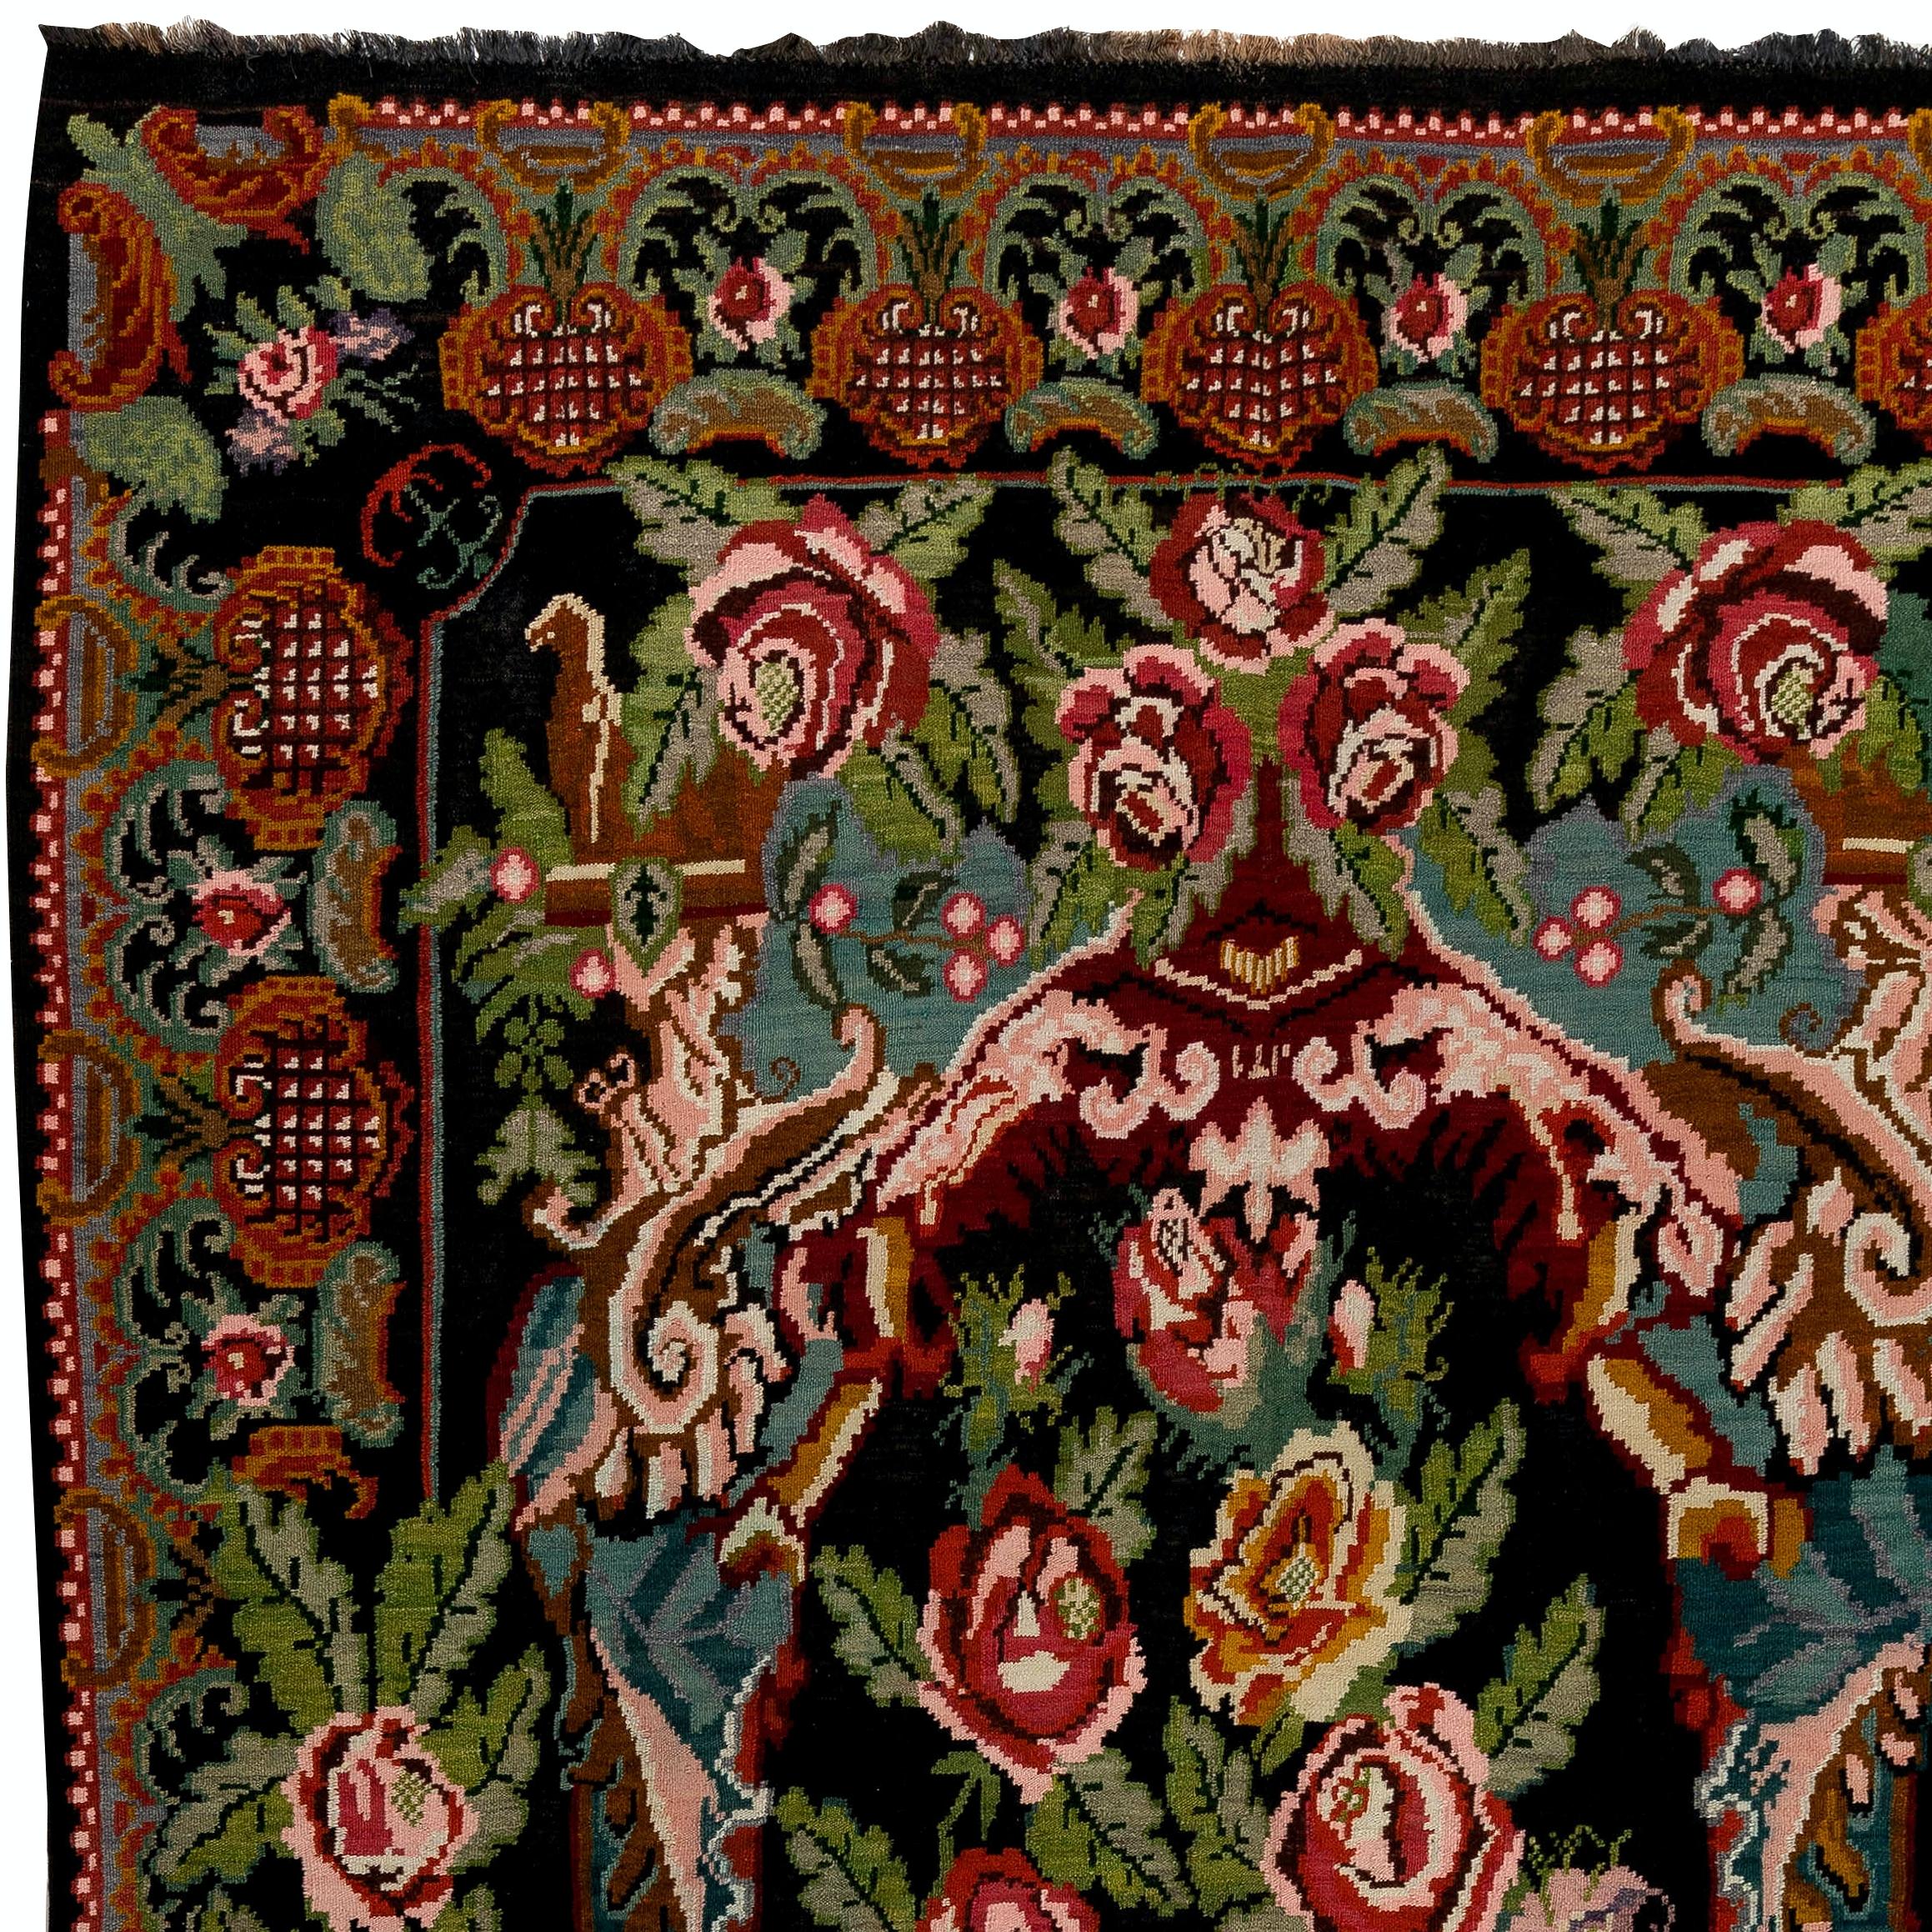 One of a kind vintage Bessarabian Kilim. 
A handwoven Eastern European Rug from Moldova. These traditional Moldovan flat-weaves are inspired from vintage Aubusson carpets but they are distinguished with their black grounds, large floral patterns in